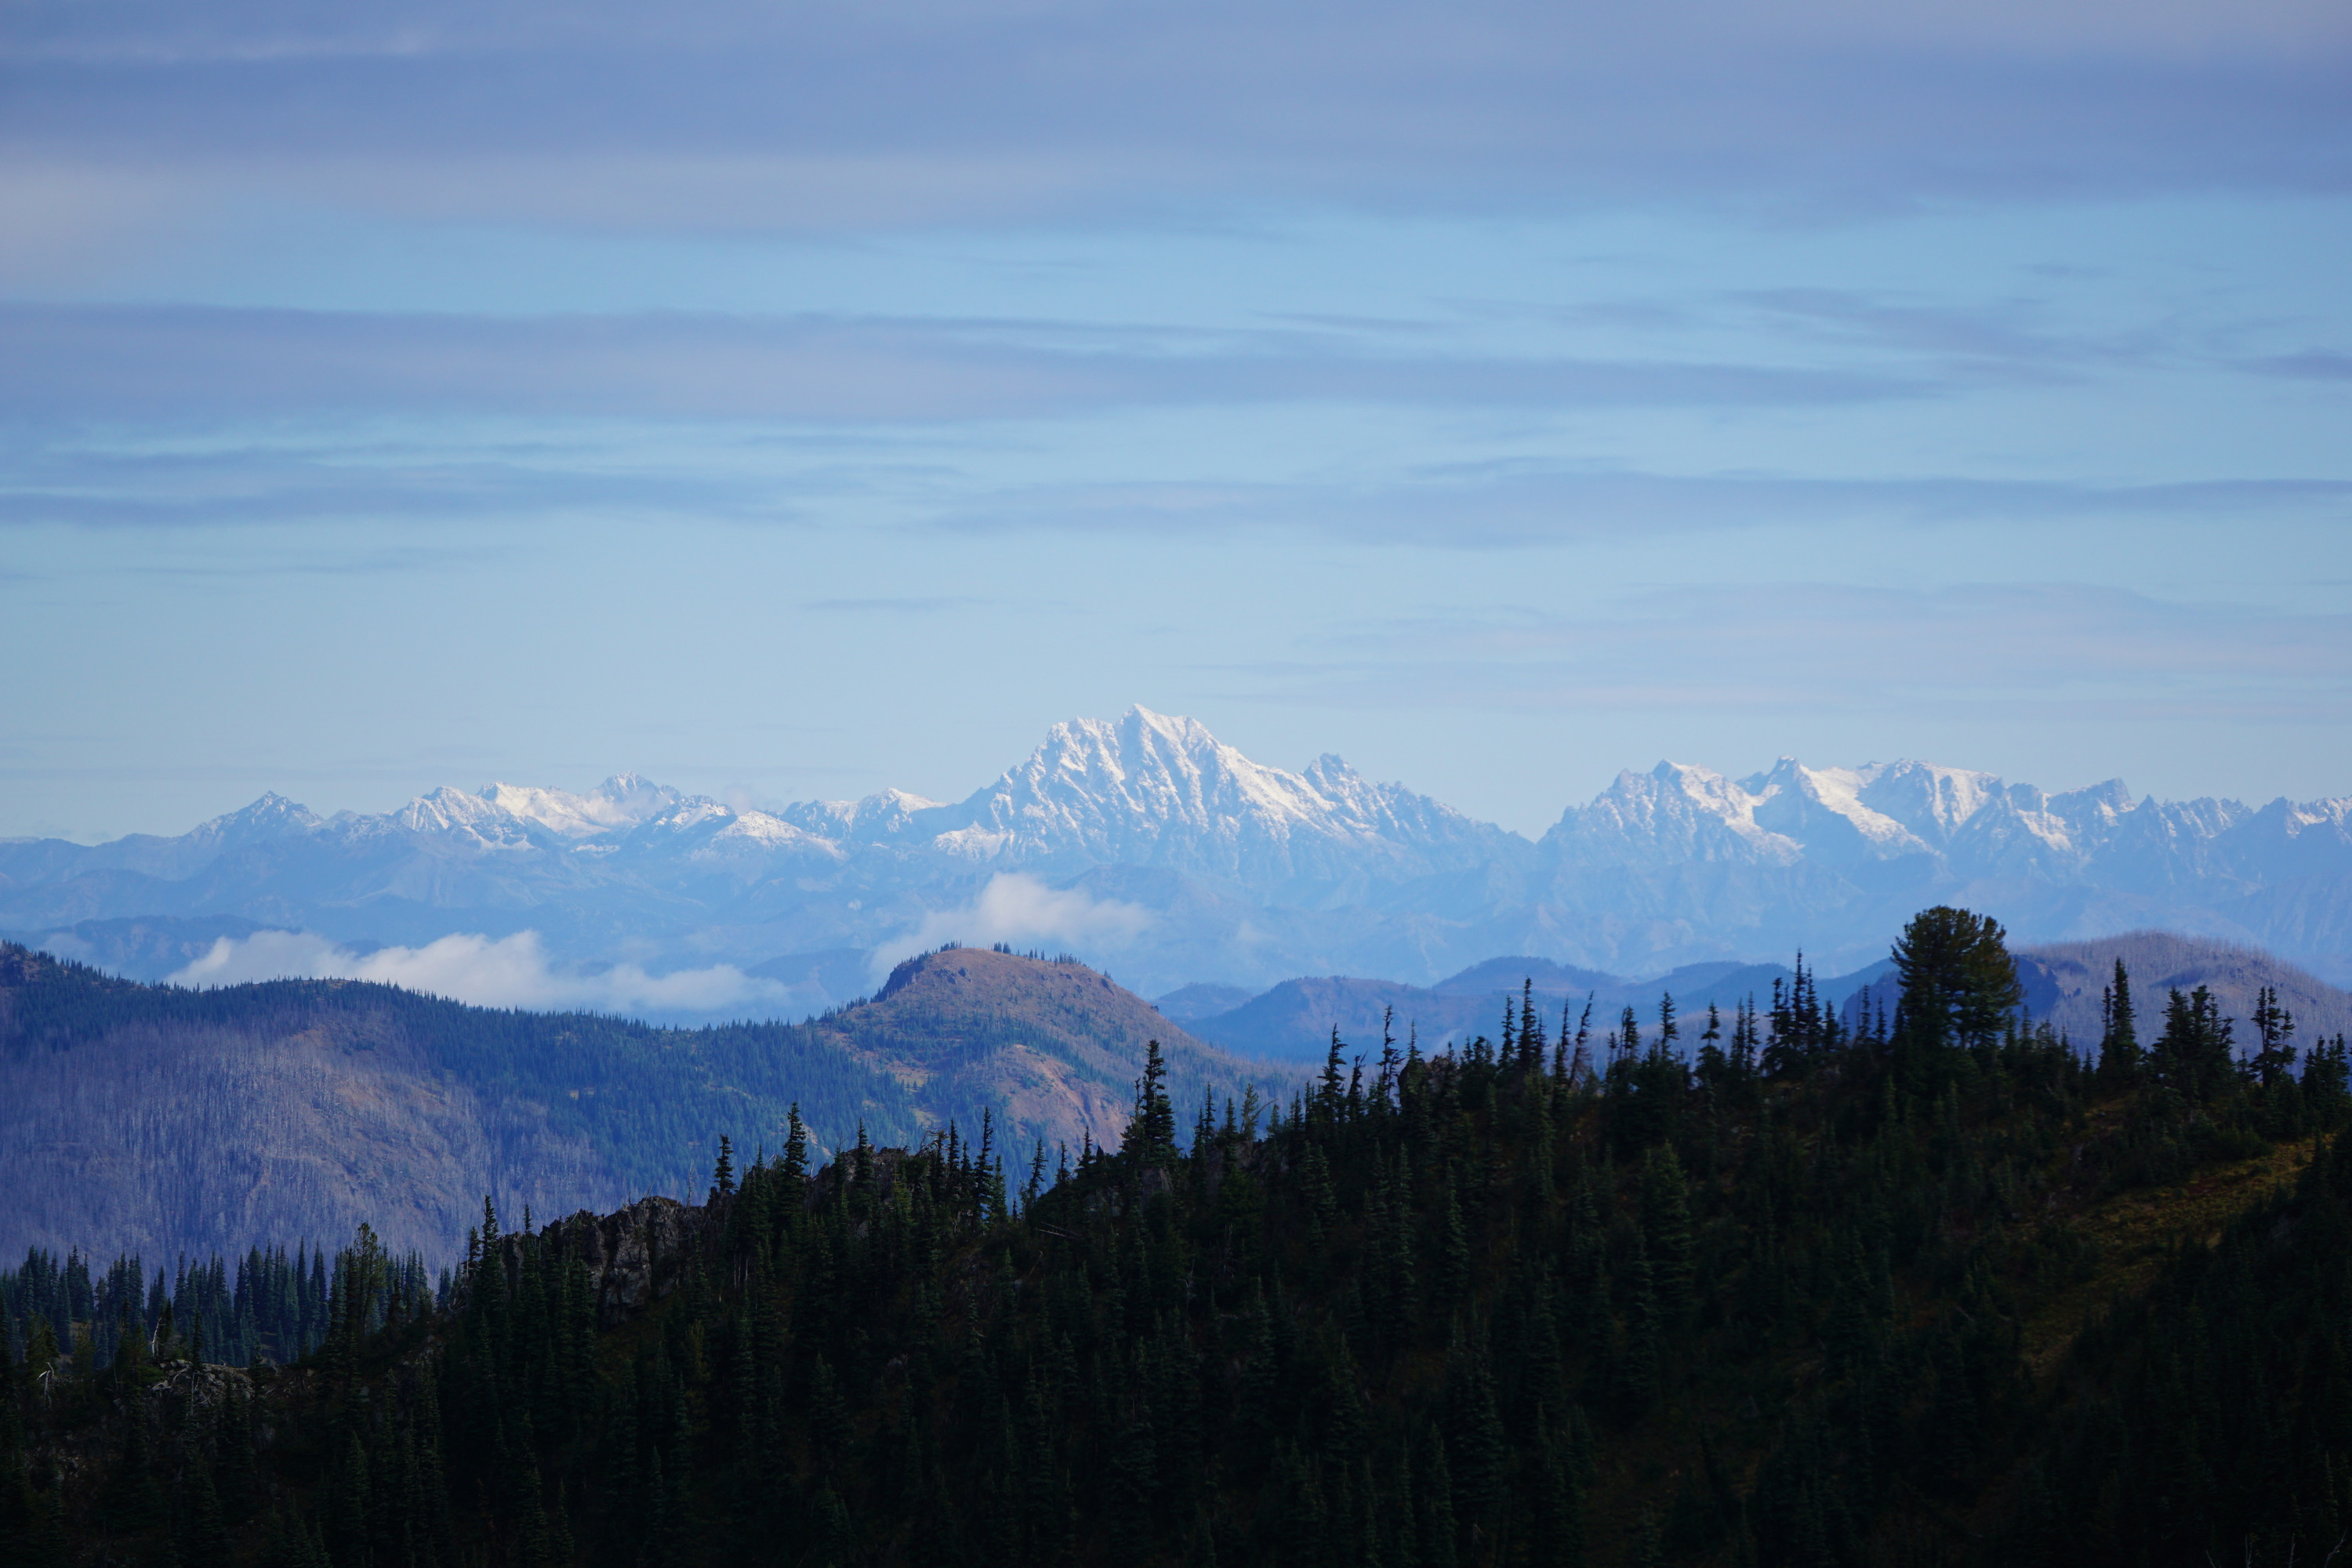 A distant snowy jagged mountain range with a prominent central peak. 